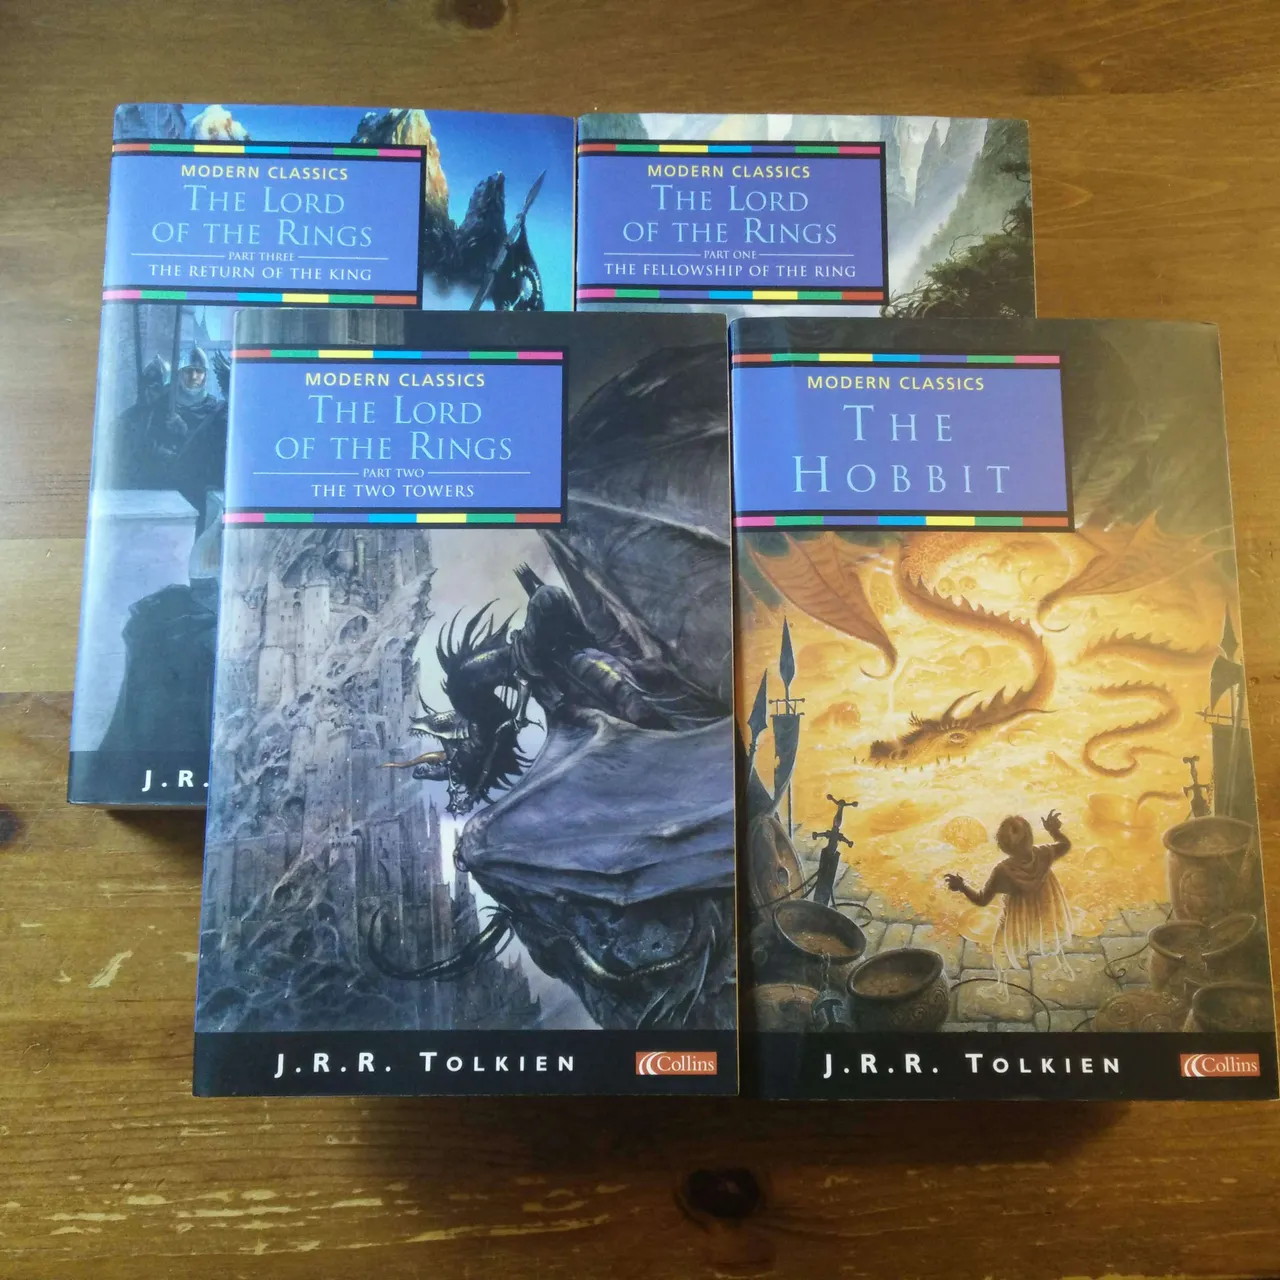 The Lord of the Rings Box Set by J.R.R. Tolkien photo 1